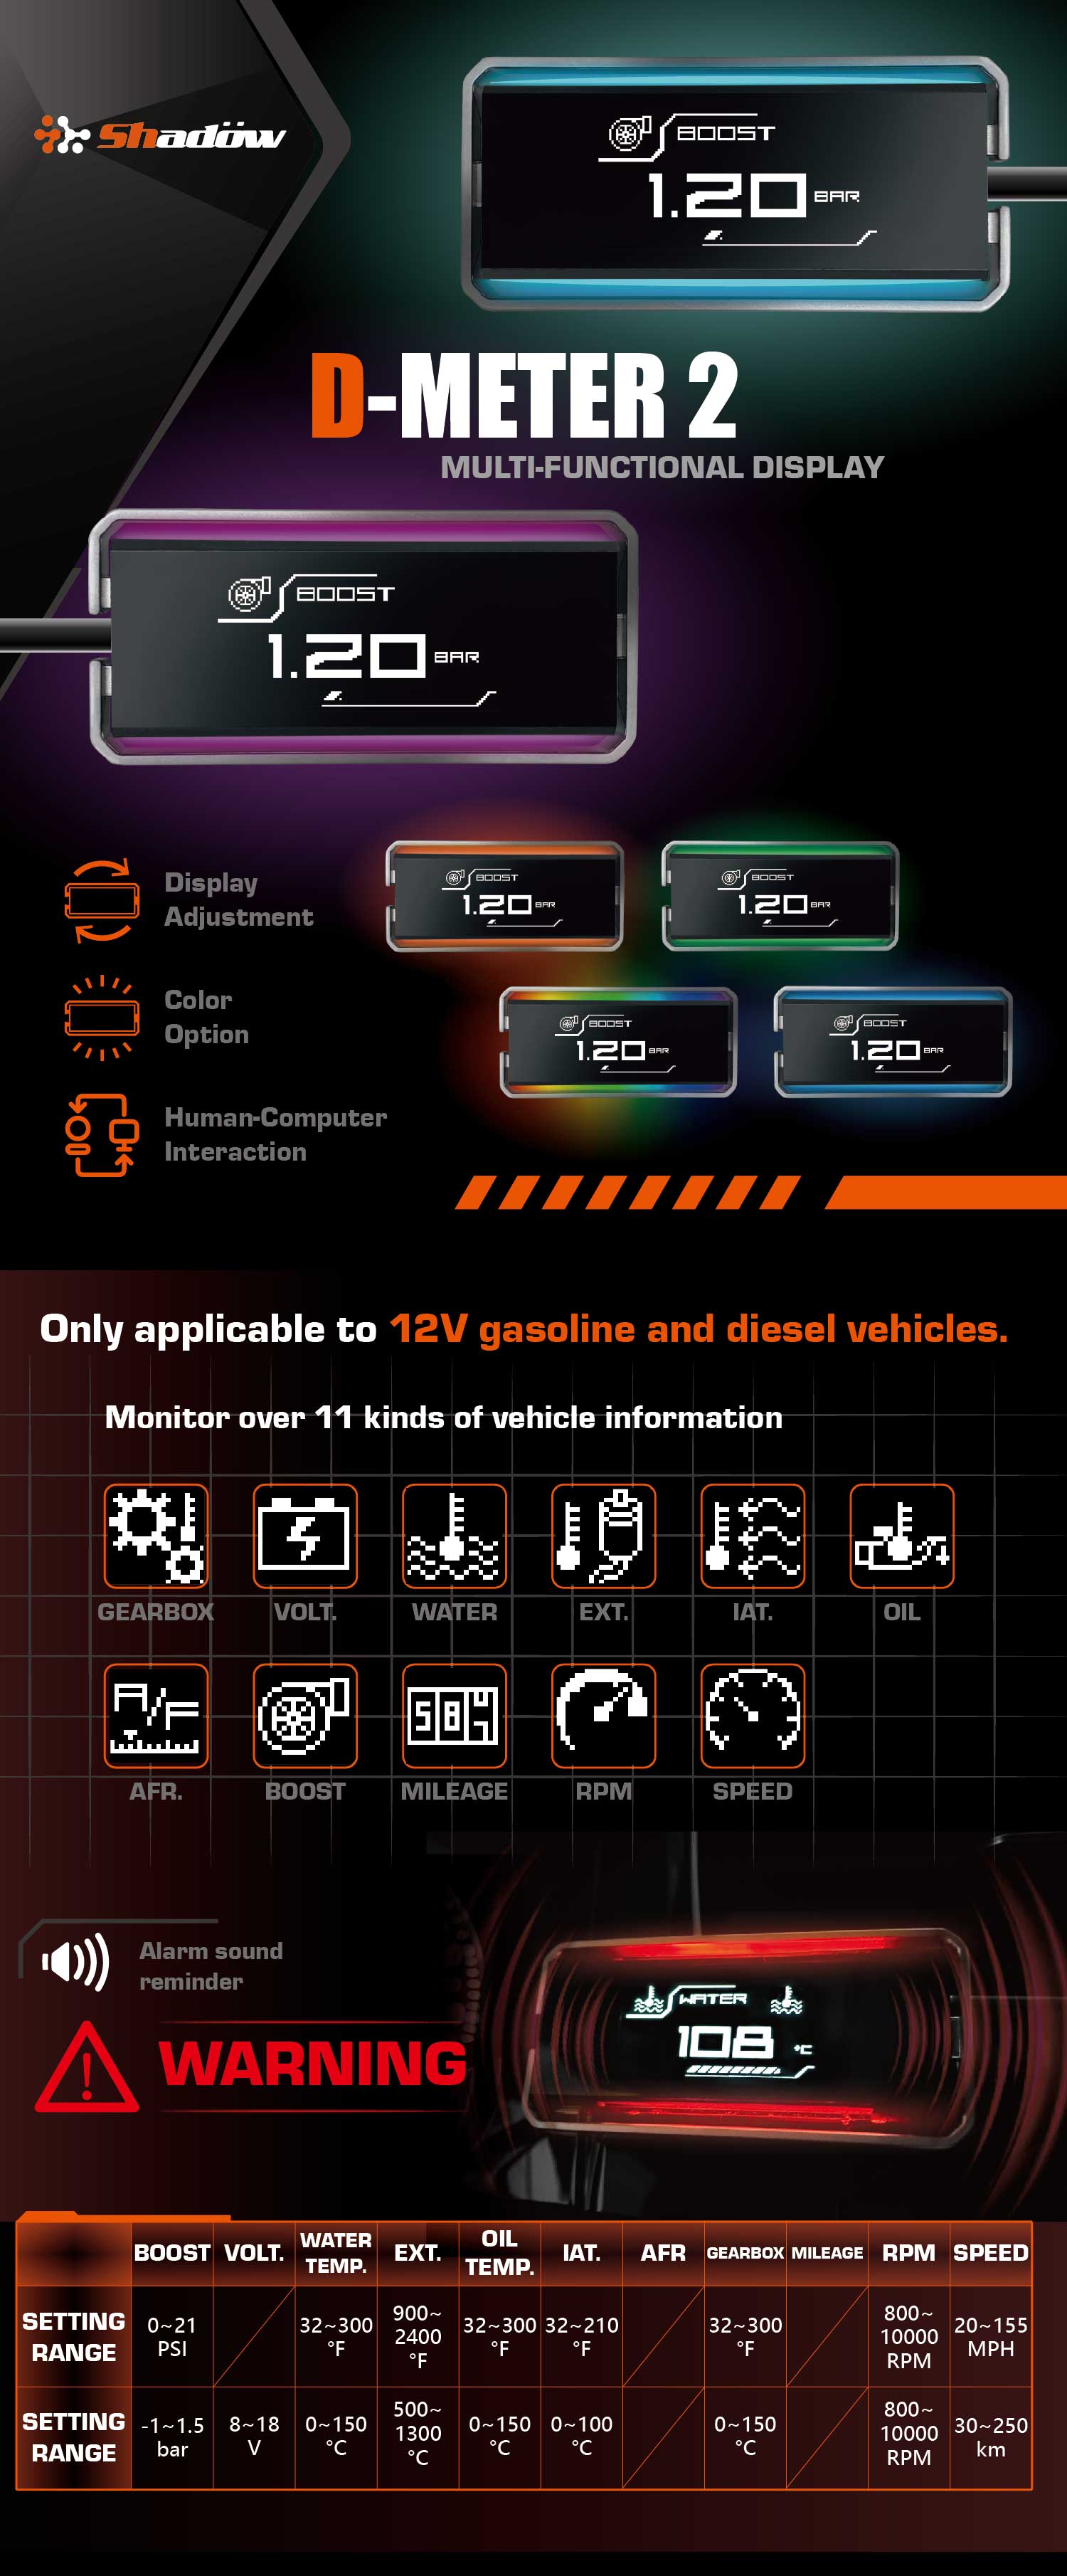 D-METER 2 can monitor over 11 kinds of vehicle information